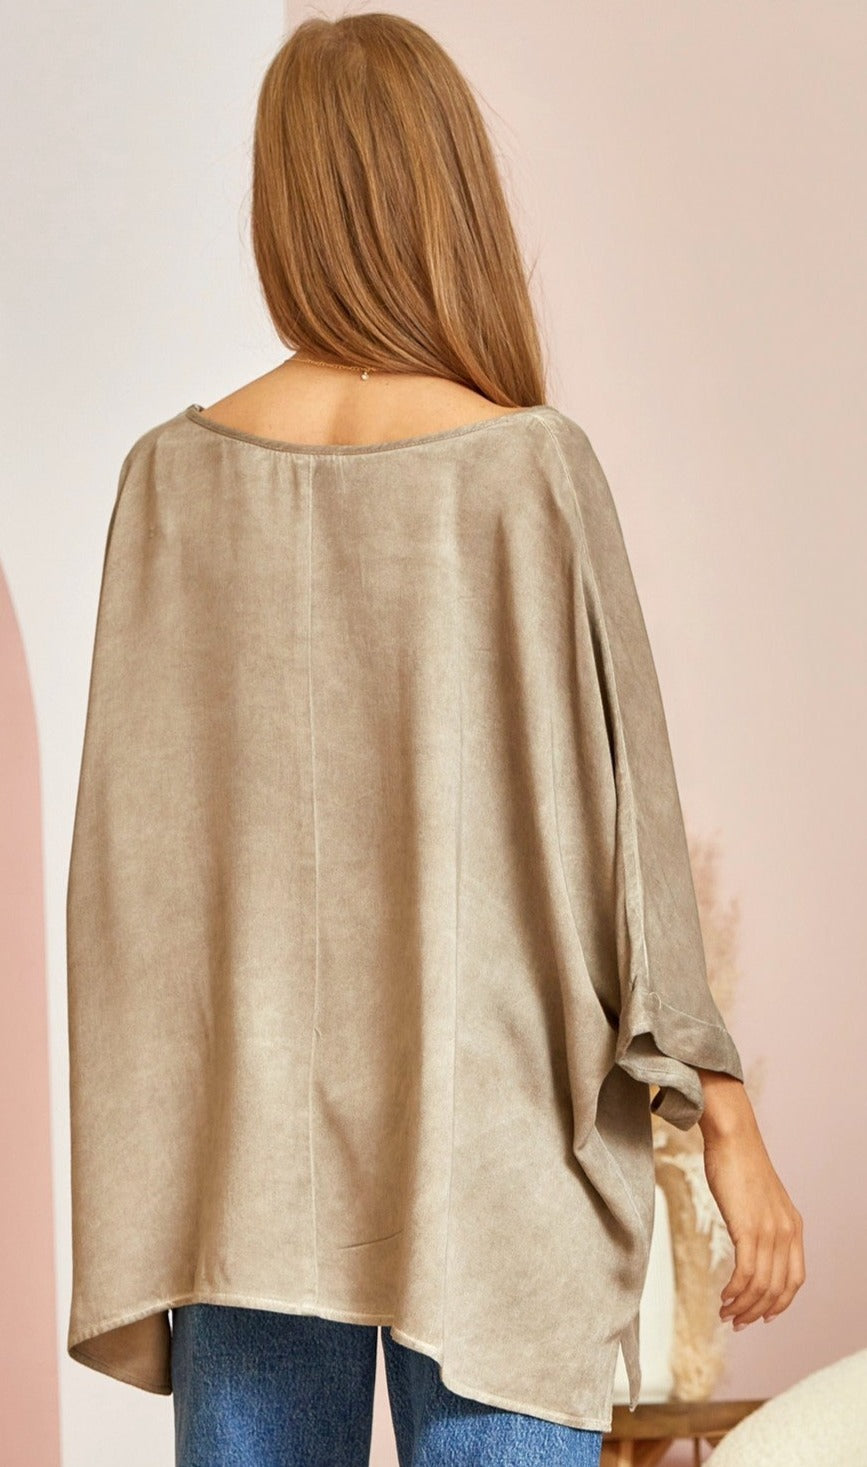 PLUS SIZE ANDREE by UNIT OVERSIZED EASY TOP in MOCHA